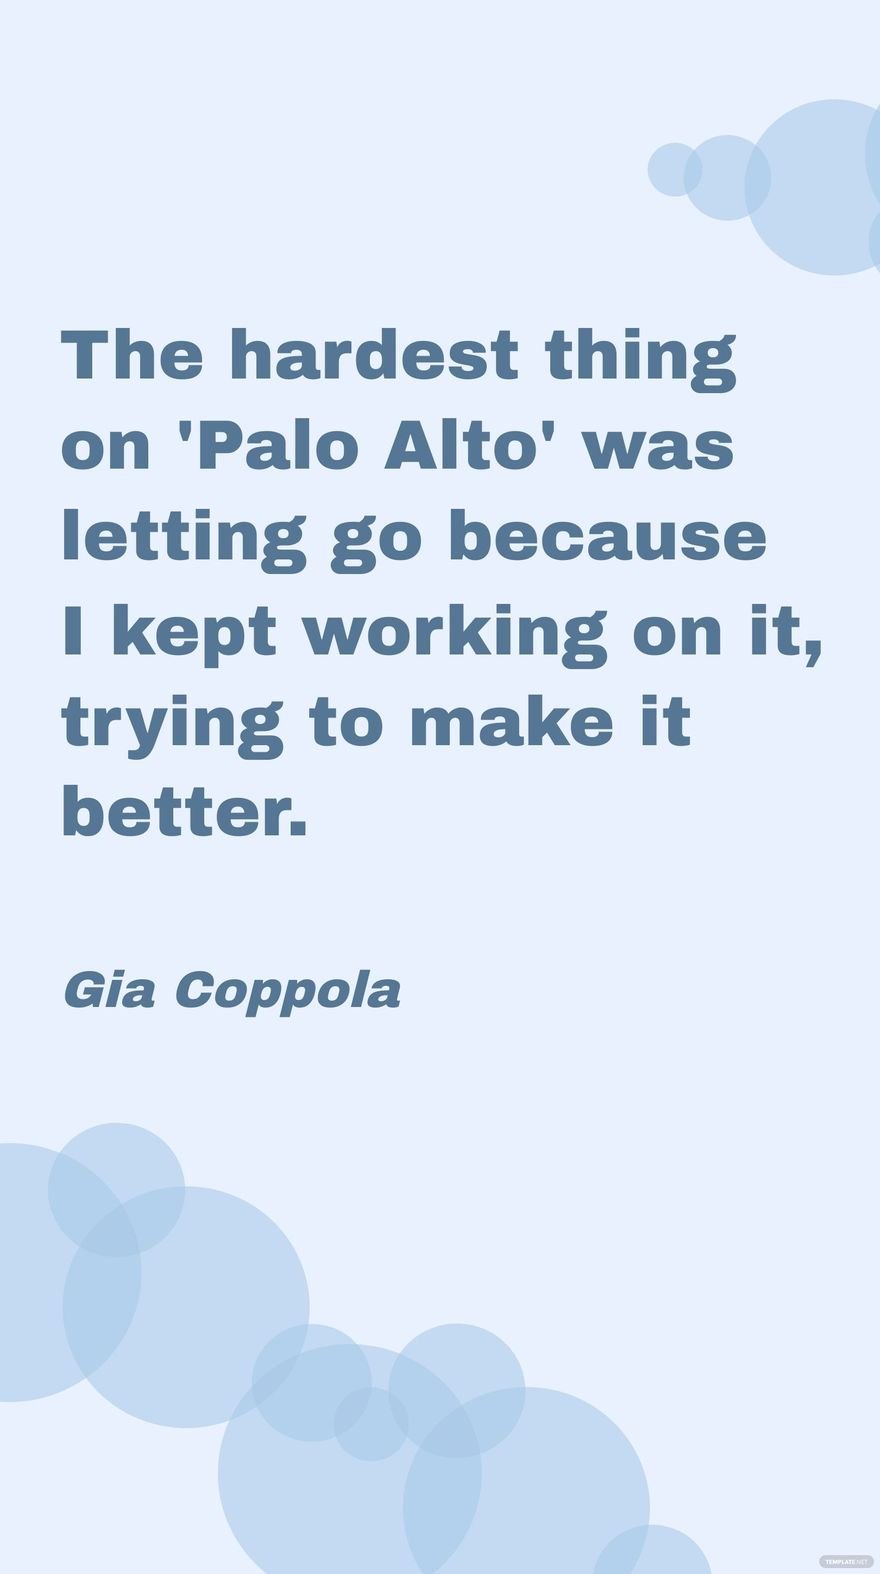 Gia Coppola - The hardest thing on 'Palo Alto' was letting go because I kept working on it, trying to make it better.